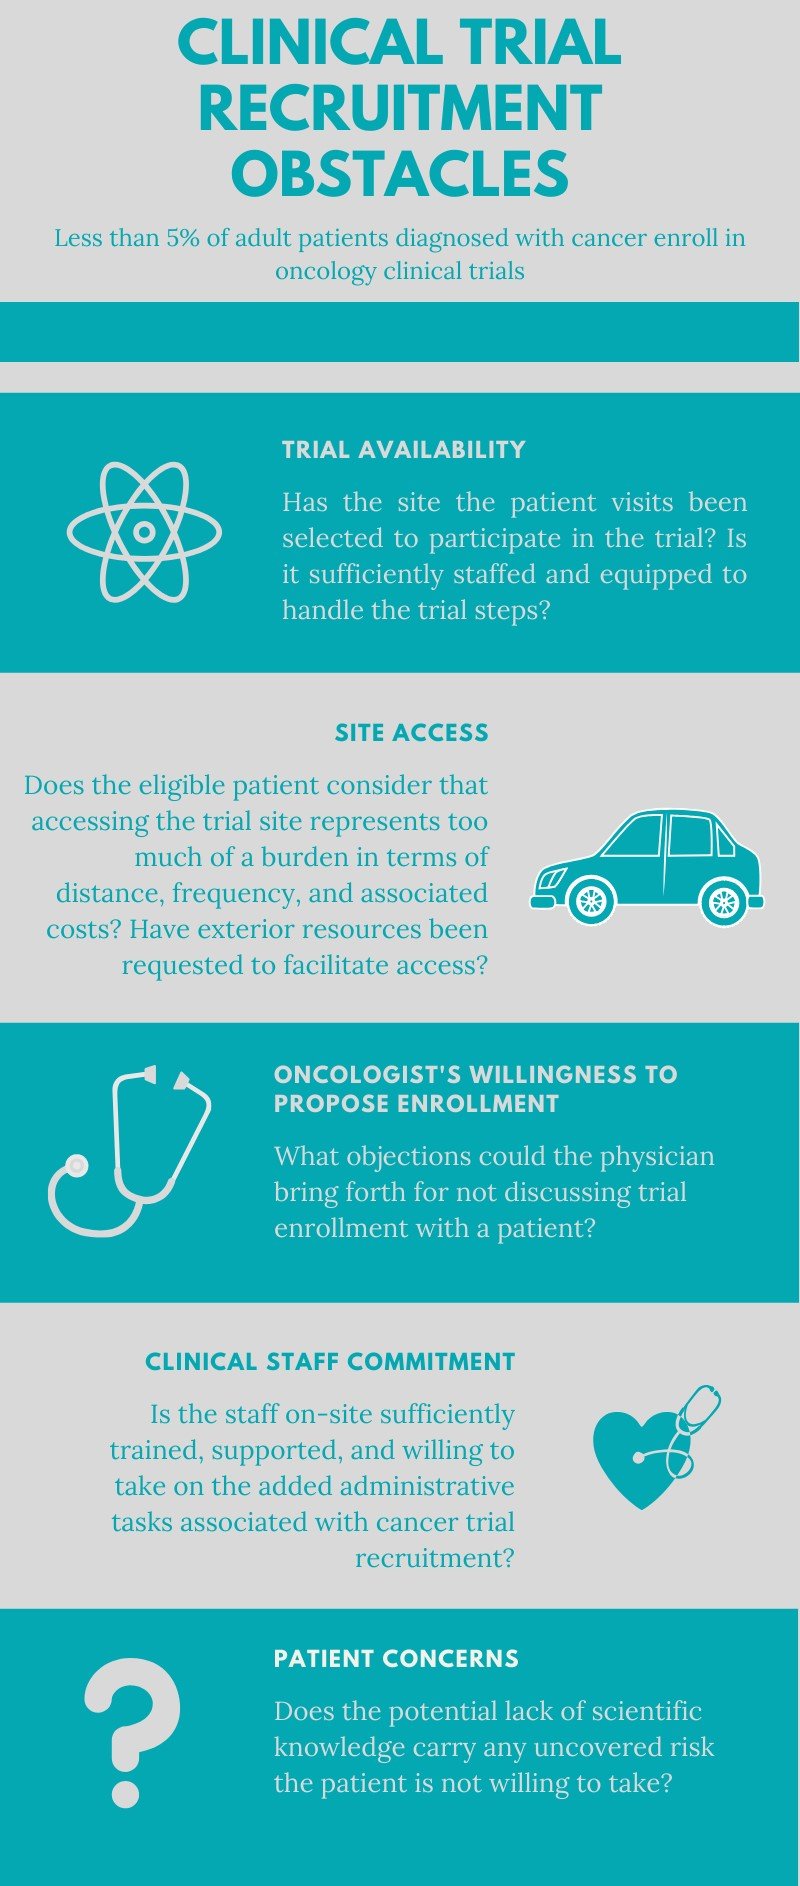 Clinical trial recruitment obstacles infographic